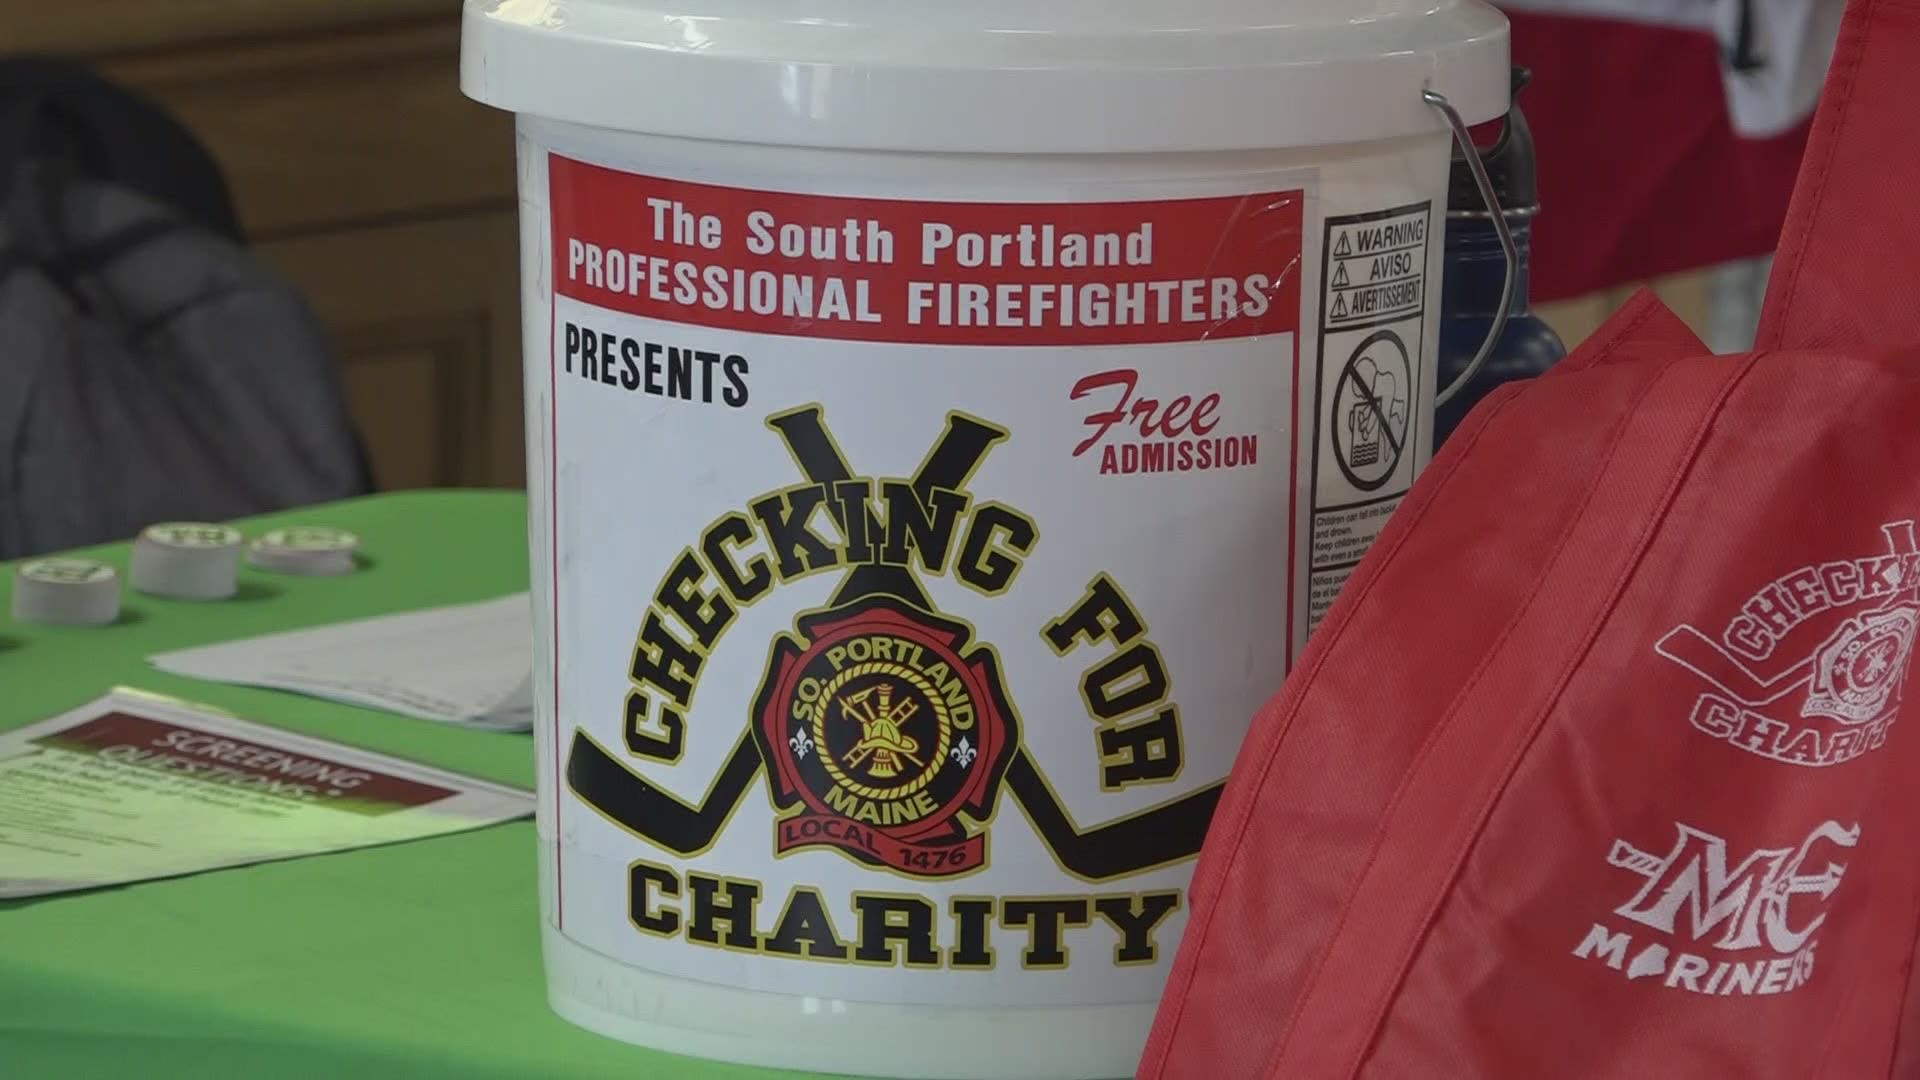 The fourth annual "Checking for Charity" hockey game was canceled last year due to the pandemic.